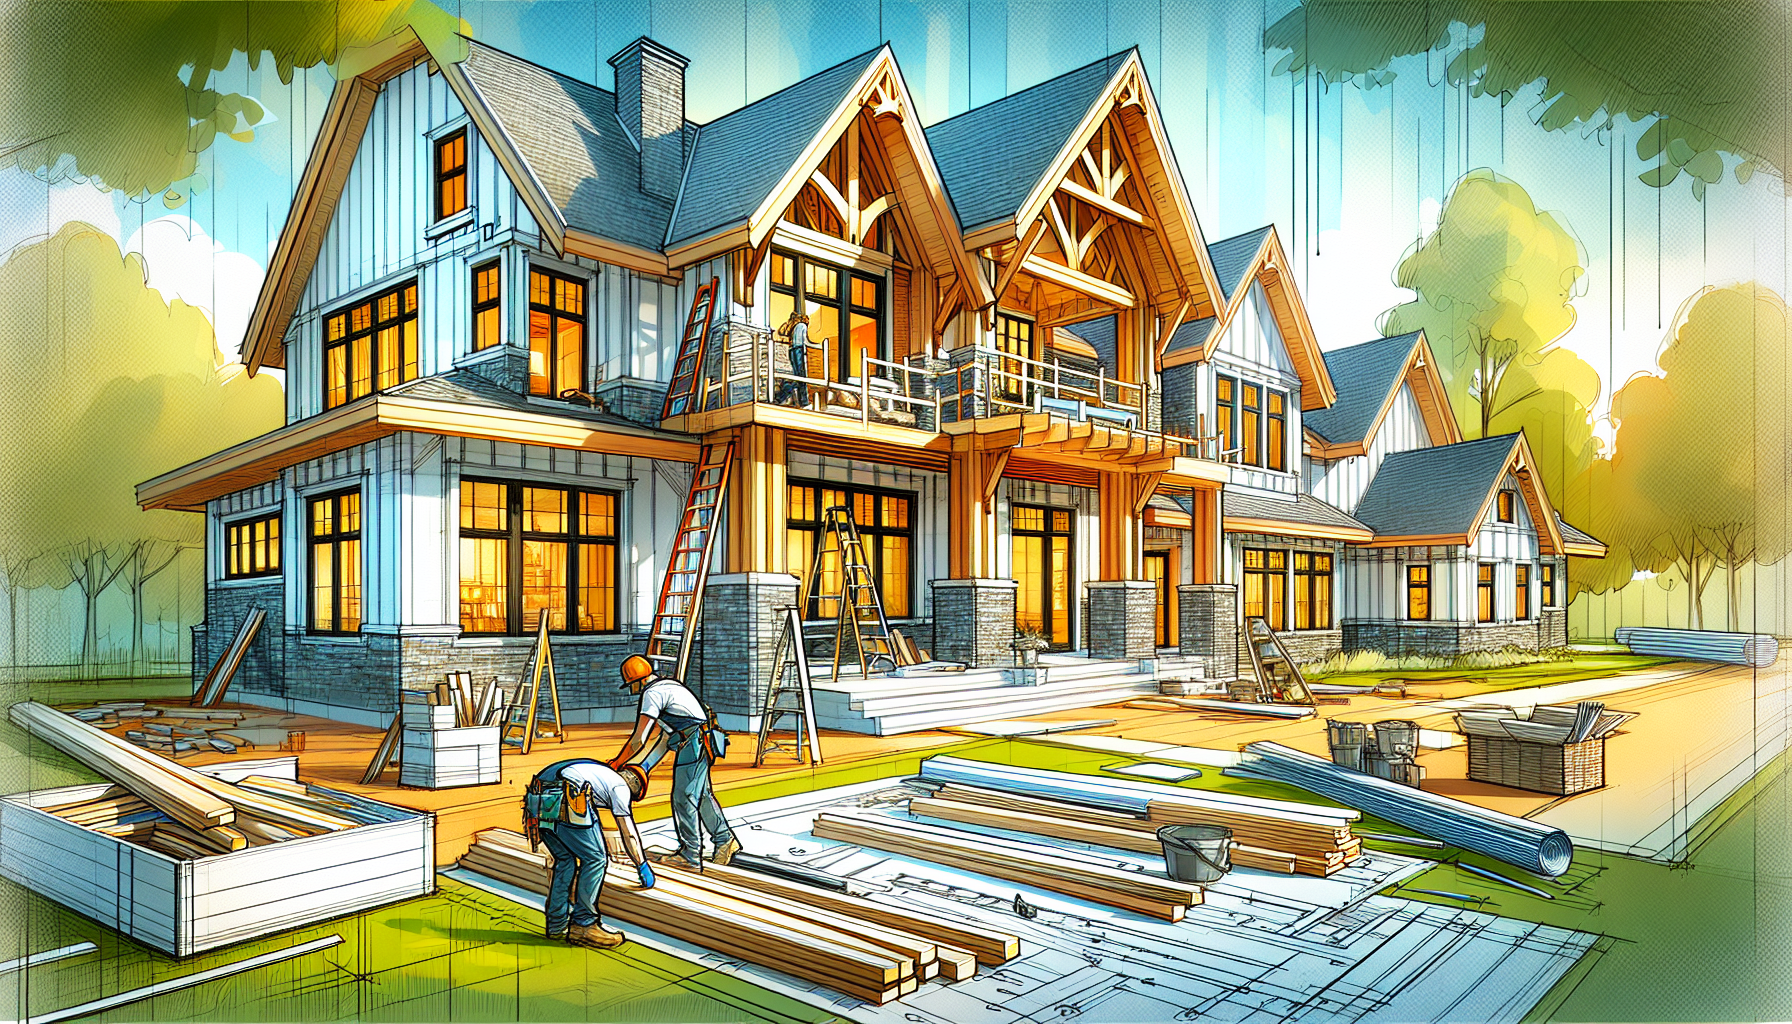 Create an image of a picturesque custom home being constructed in Michigan, showcasing the beautiful architecture and design elements being meticulously crafted by skilled builders. The scene should e